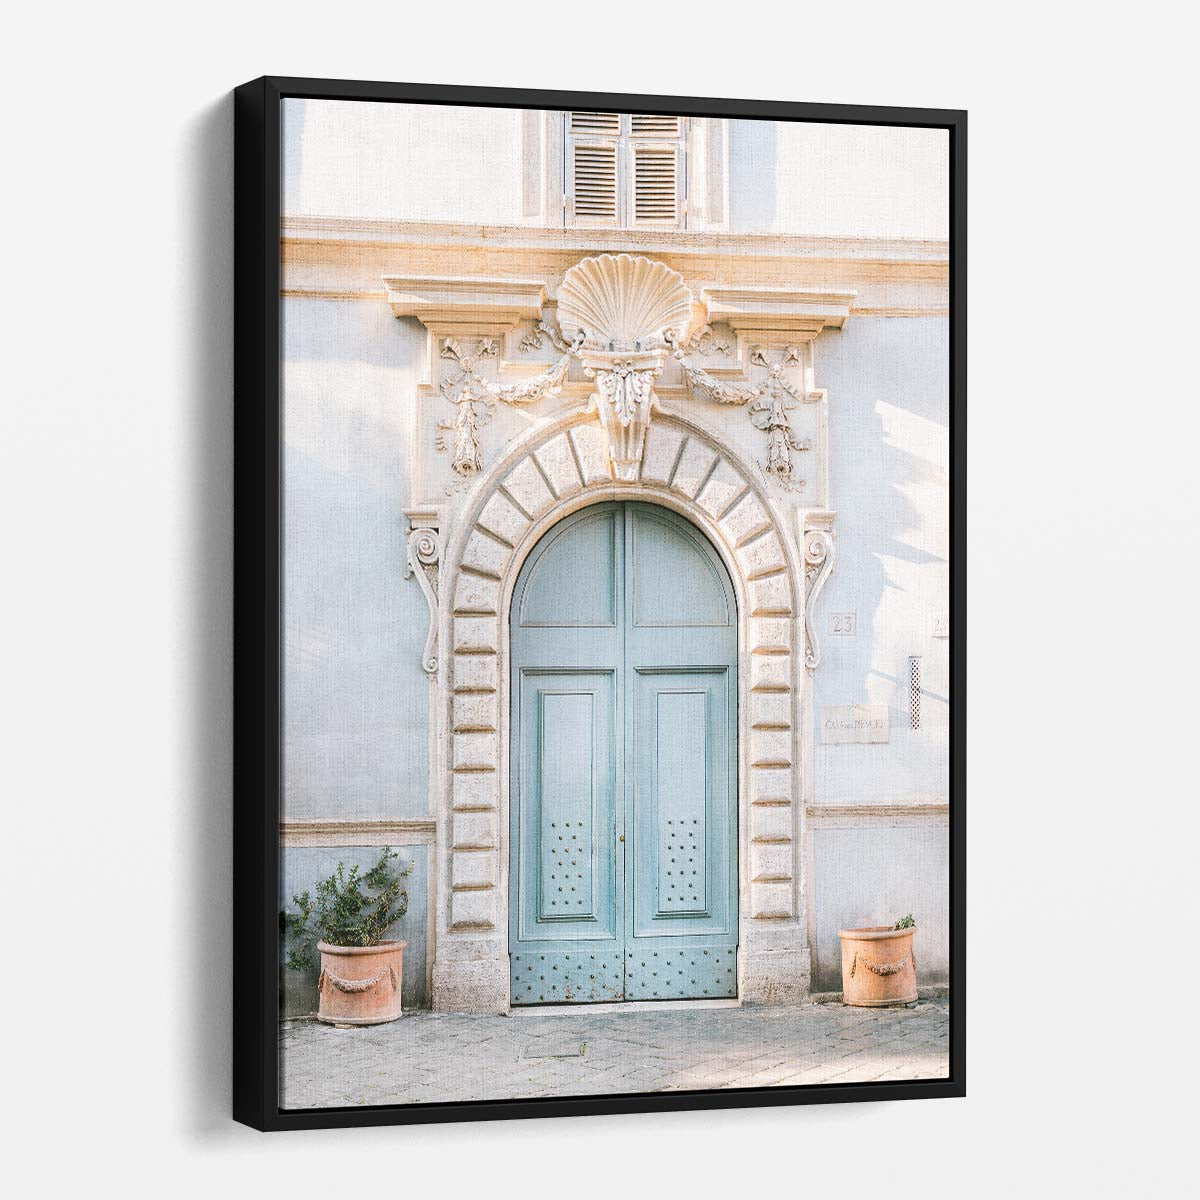 Pastel Blue Door Rome Italy Architecture Photography Wall Art by Luxuriance Designs, made in USA